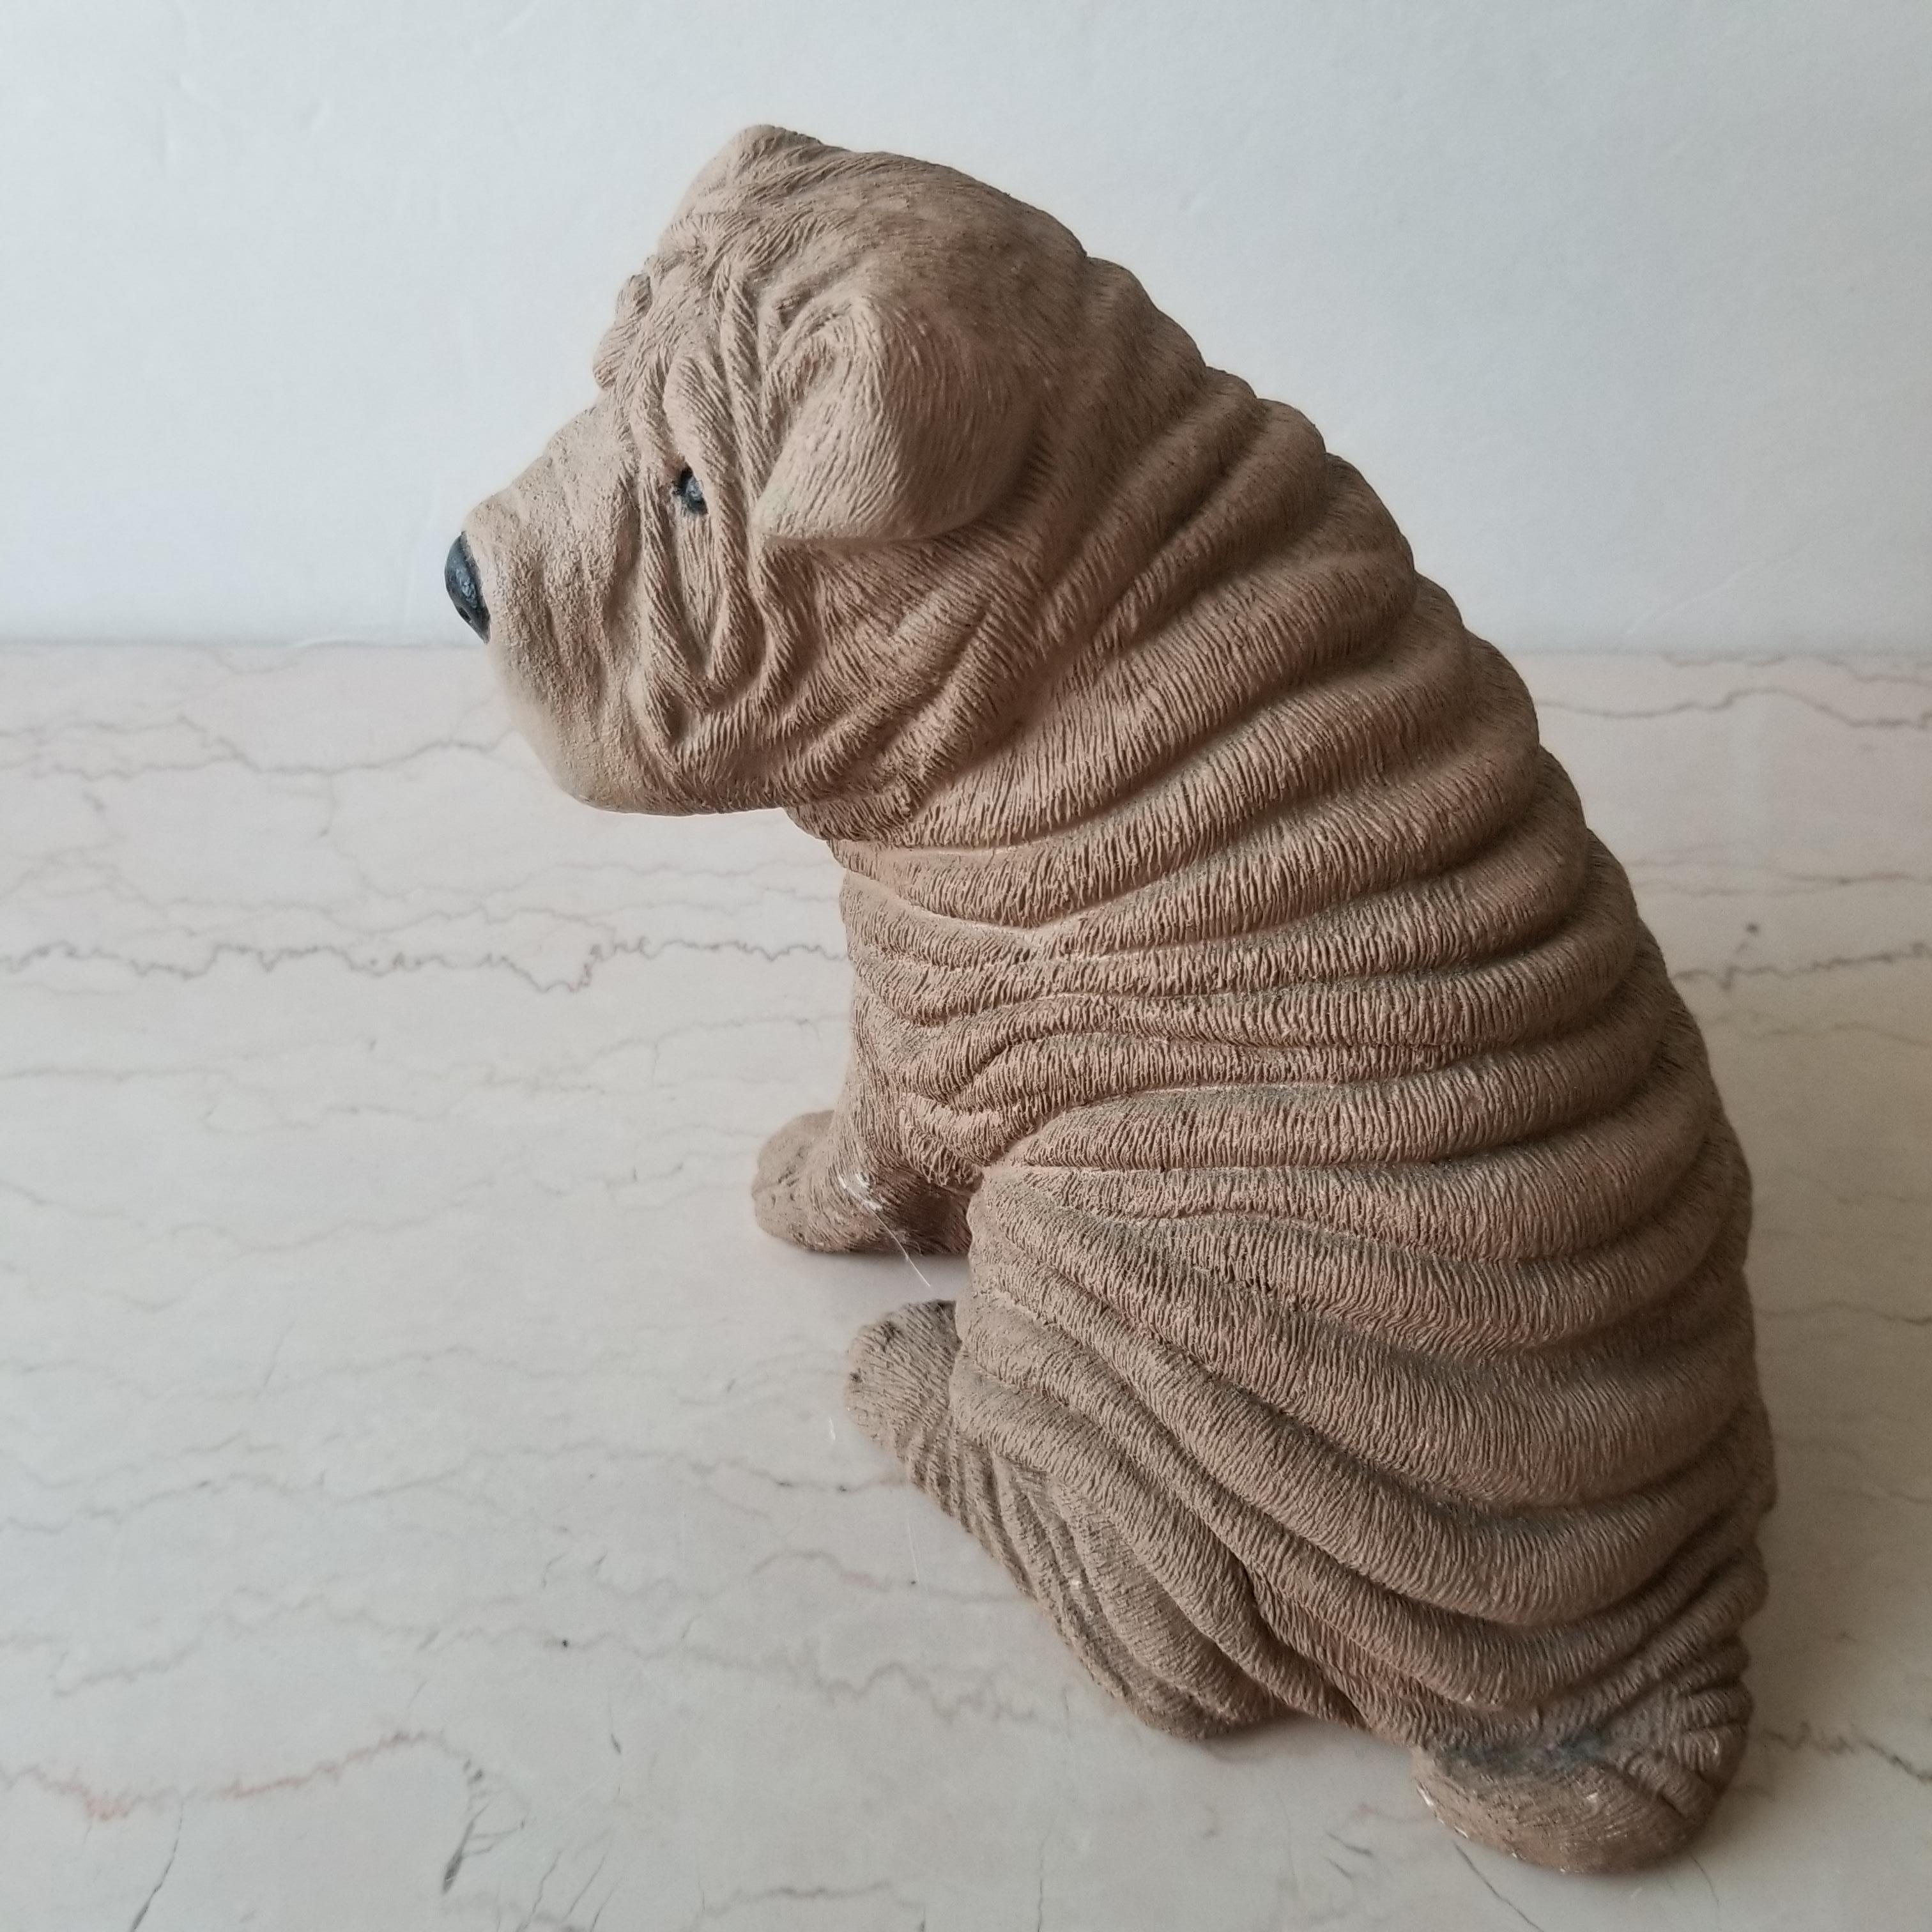 Late 20th Century 1986 Chinese Shar Pei Dog Sculpture Sandicast by Sandra Brue San Diego CA For Sale